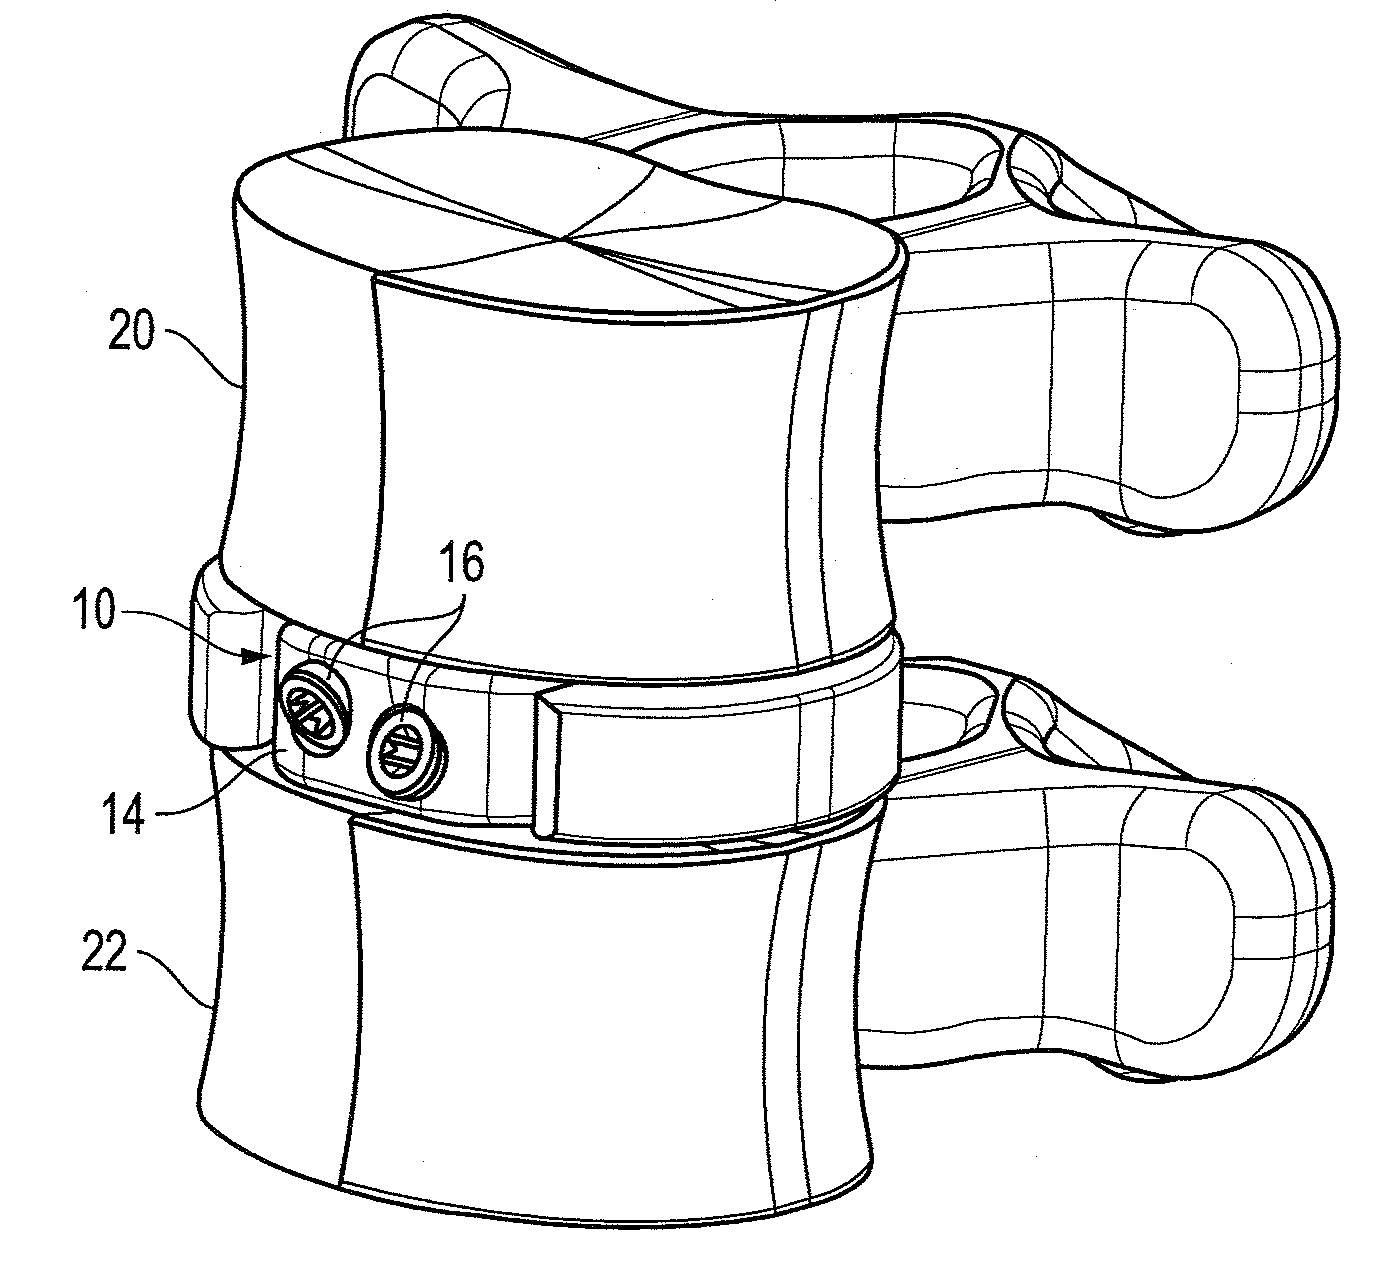 Interbody fusion device with lipped anterior plate and associated methods